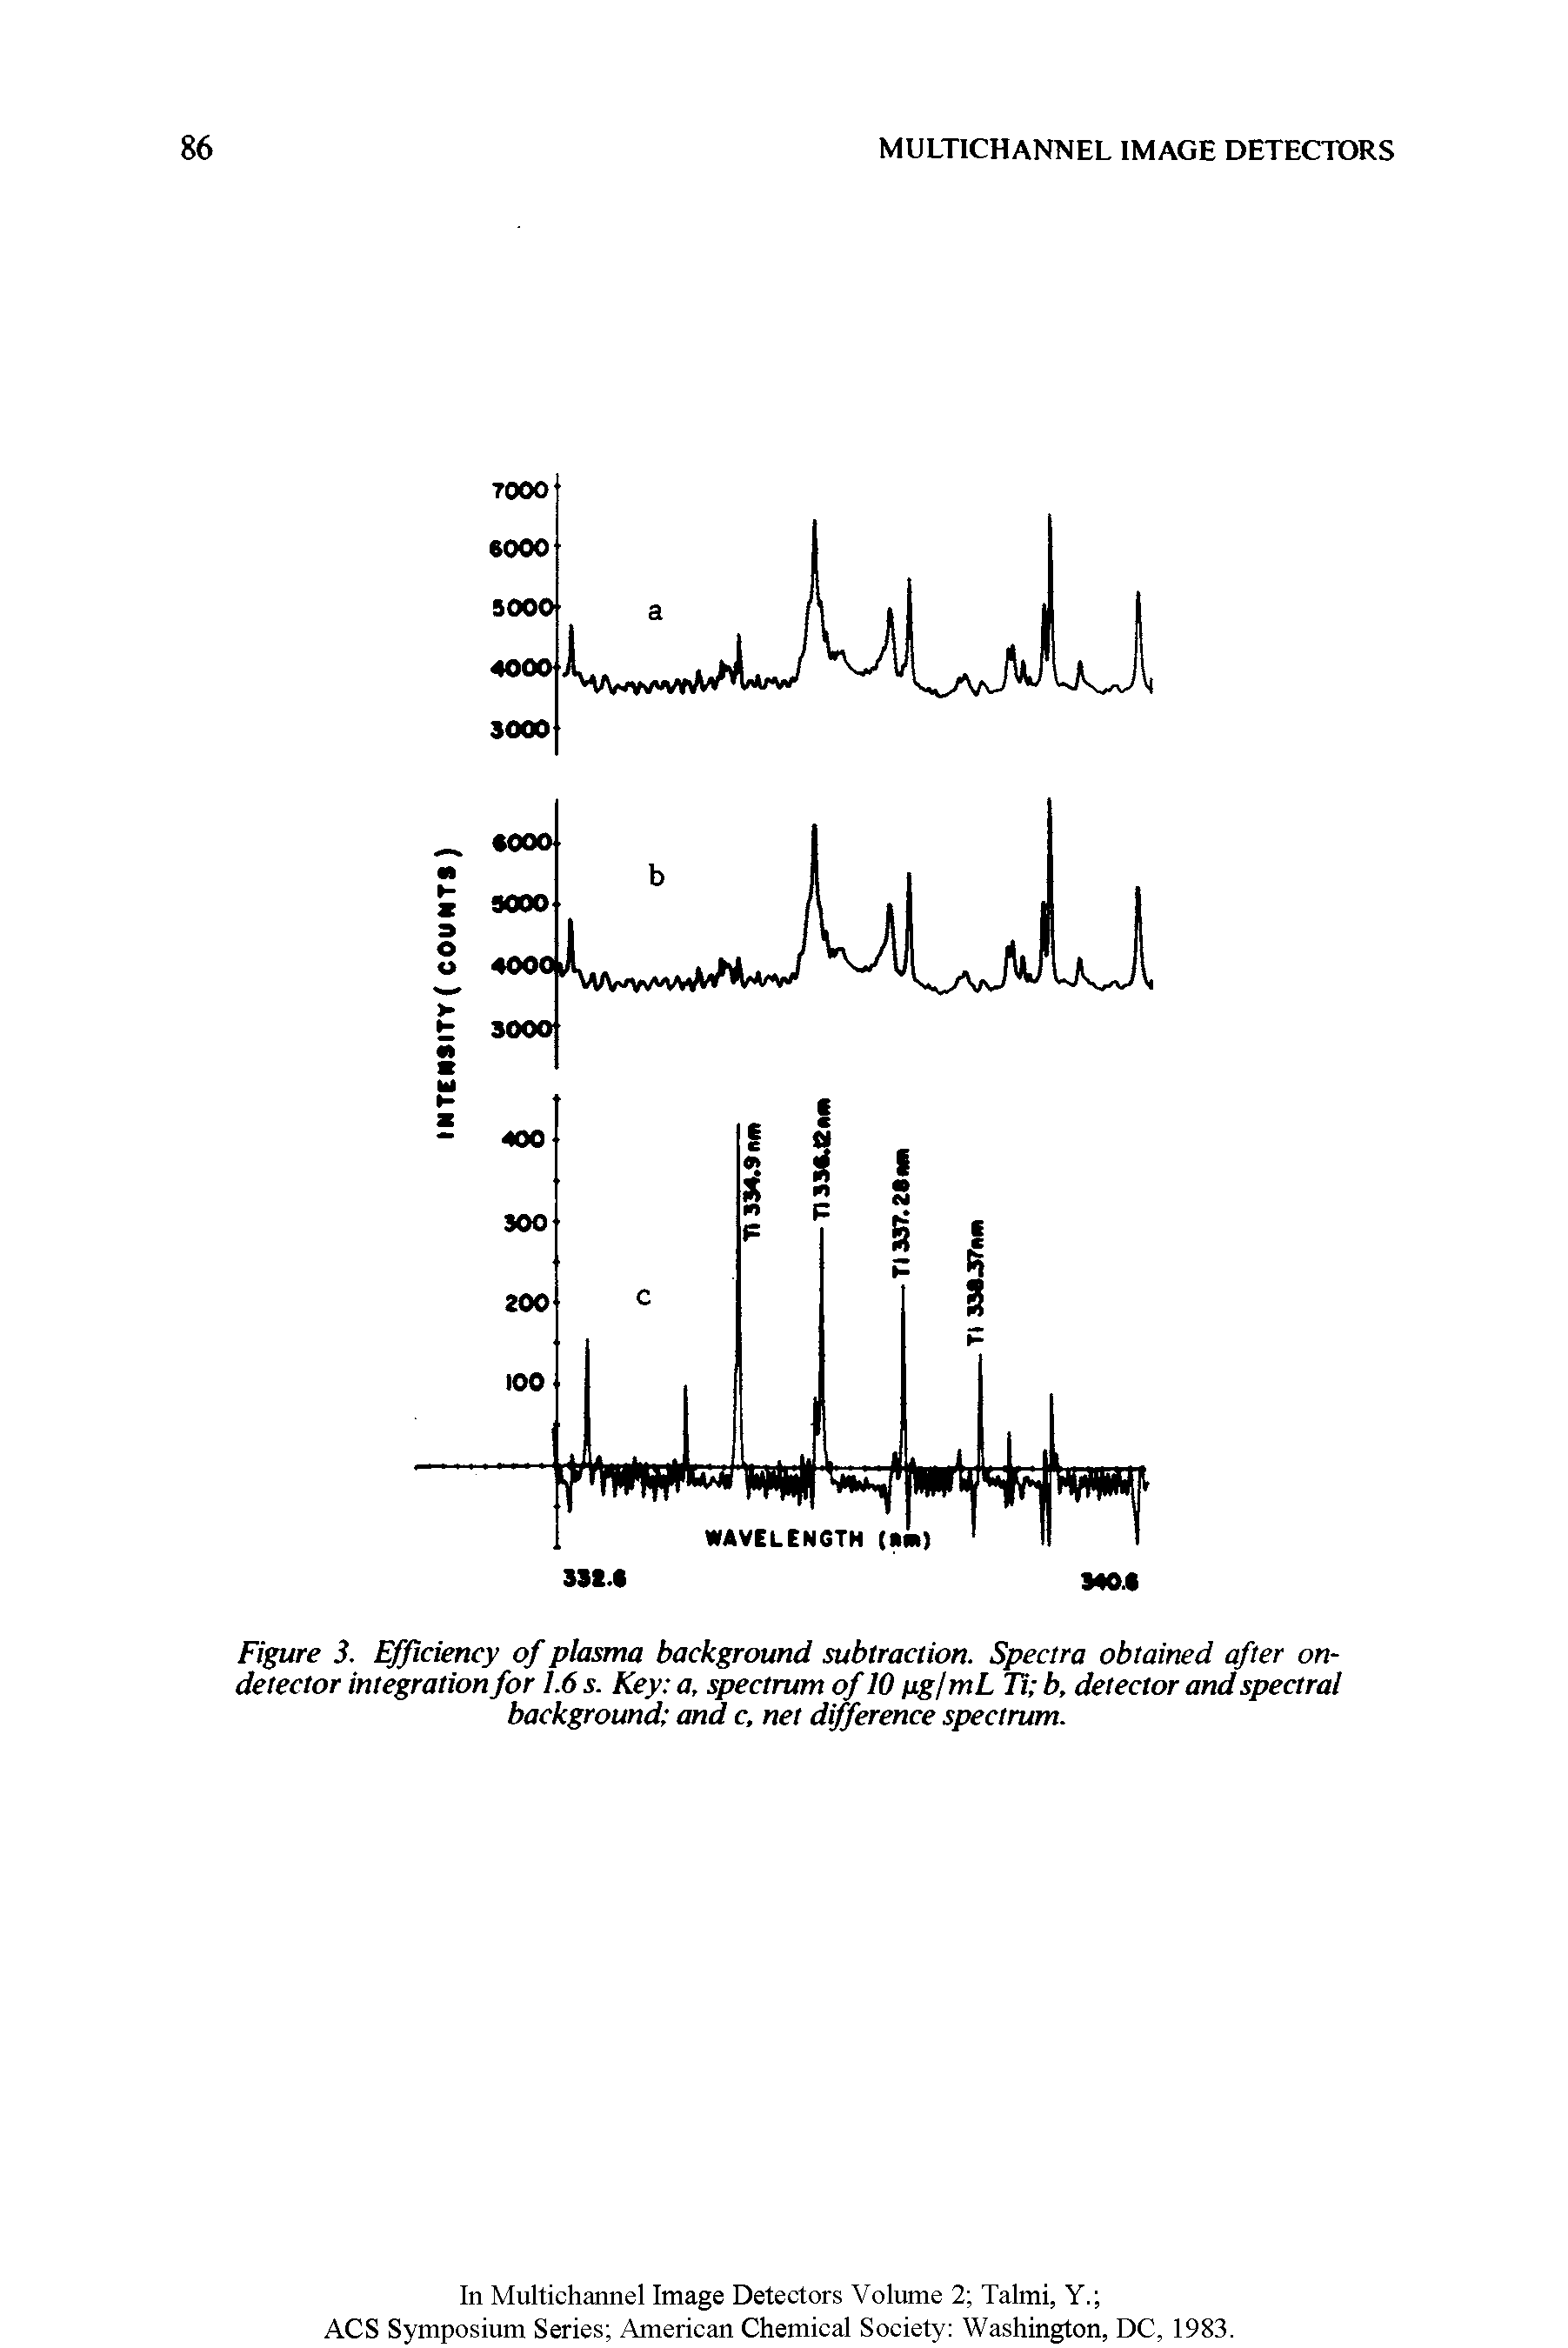 Figure 3. Efficiency of plasma background subtraction. Spectra obtained after on-detector integration for 1.6 s. Key a, spectrum of 10 pg/mL Ti b, detector and spectral background and c. net difference spectrum.